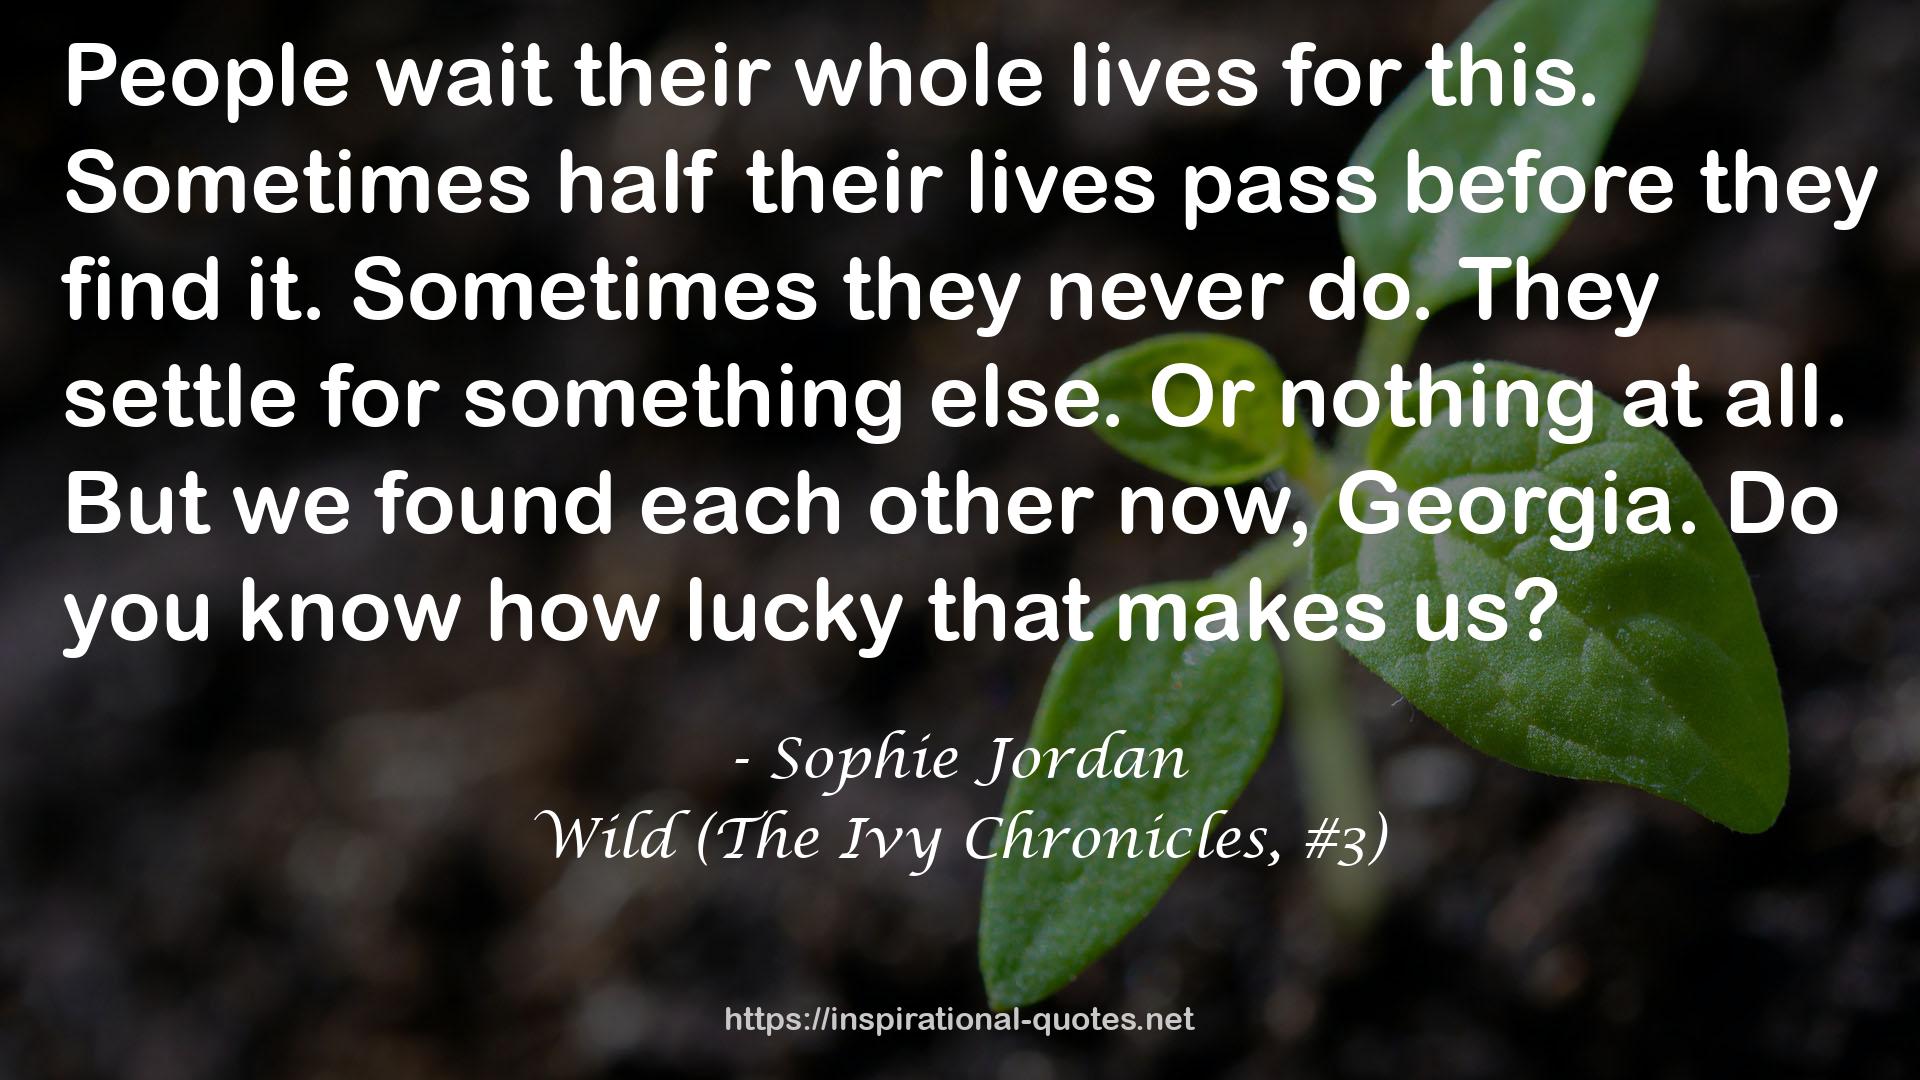 Wild (The Ivy Chronicles, #3) QUOTES